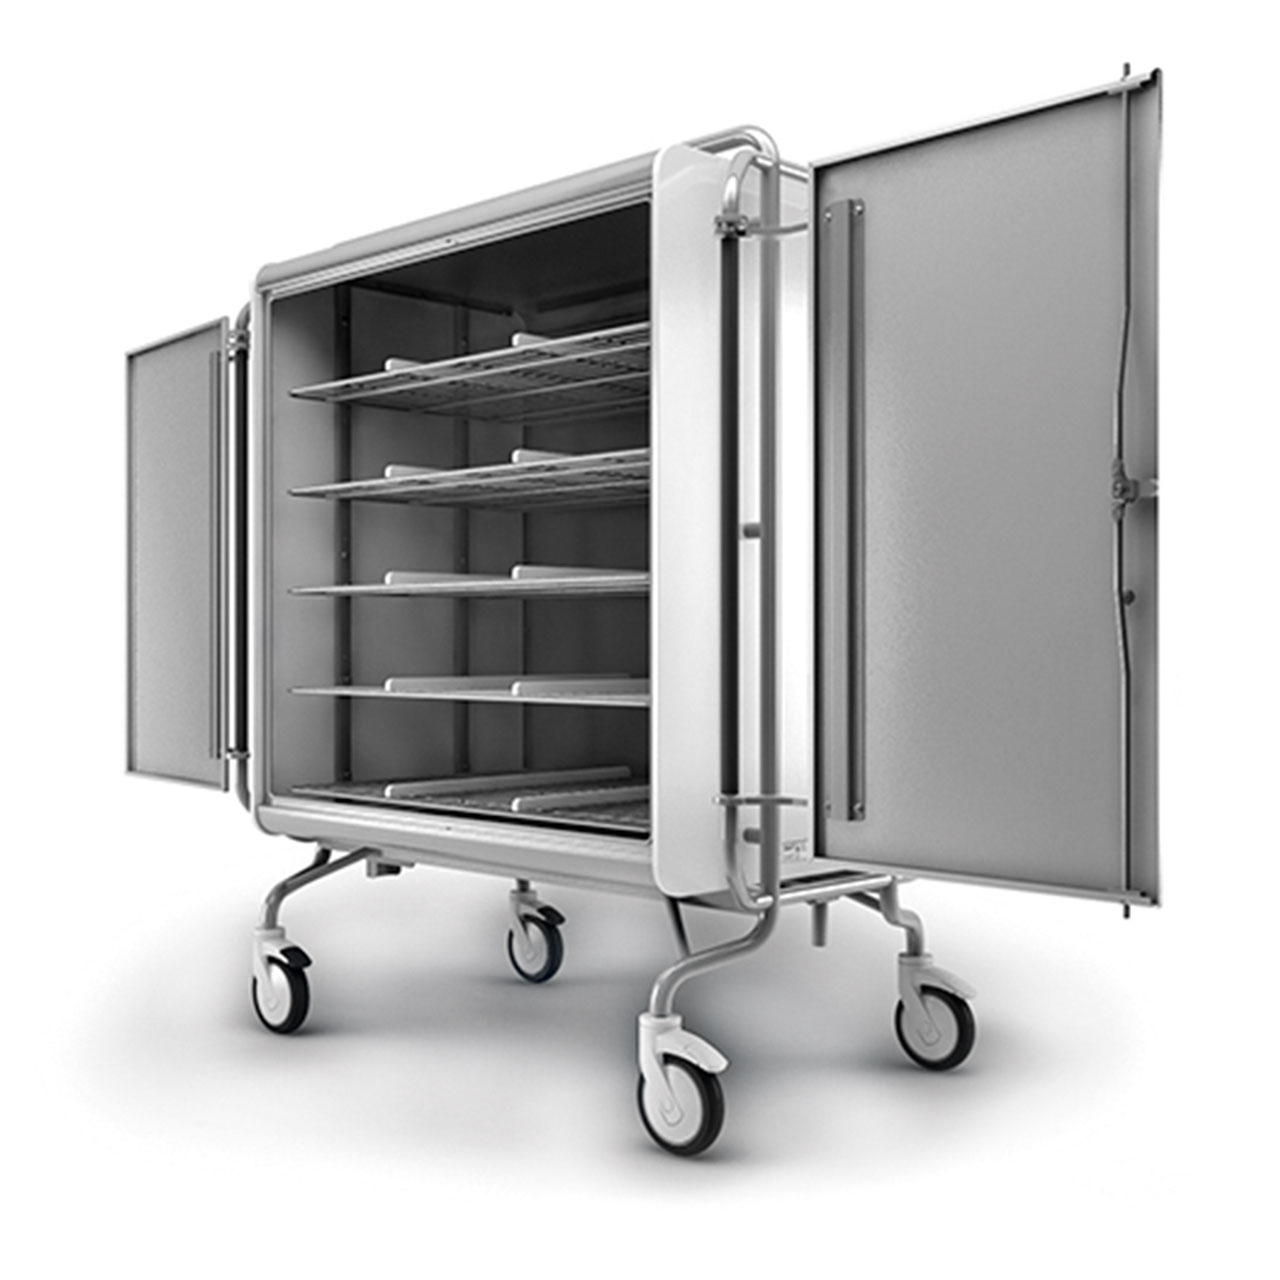 The doors can be opened 260° and fixed in the open position – very convenient when loading and unloading. 